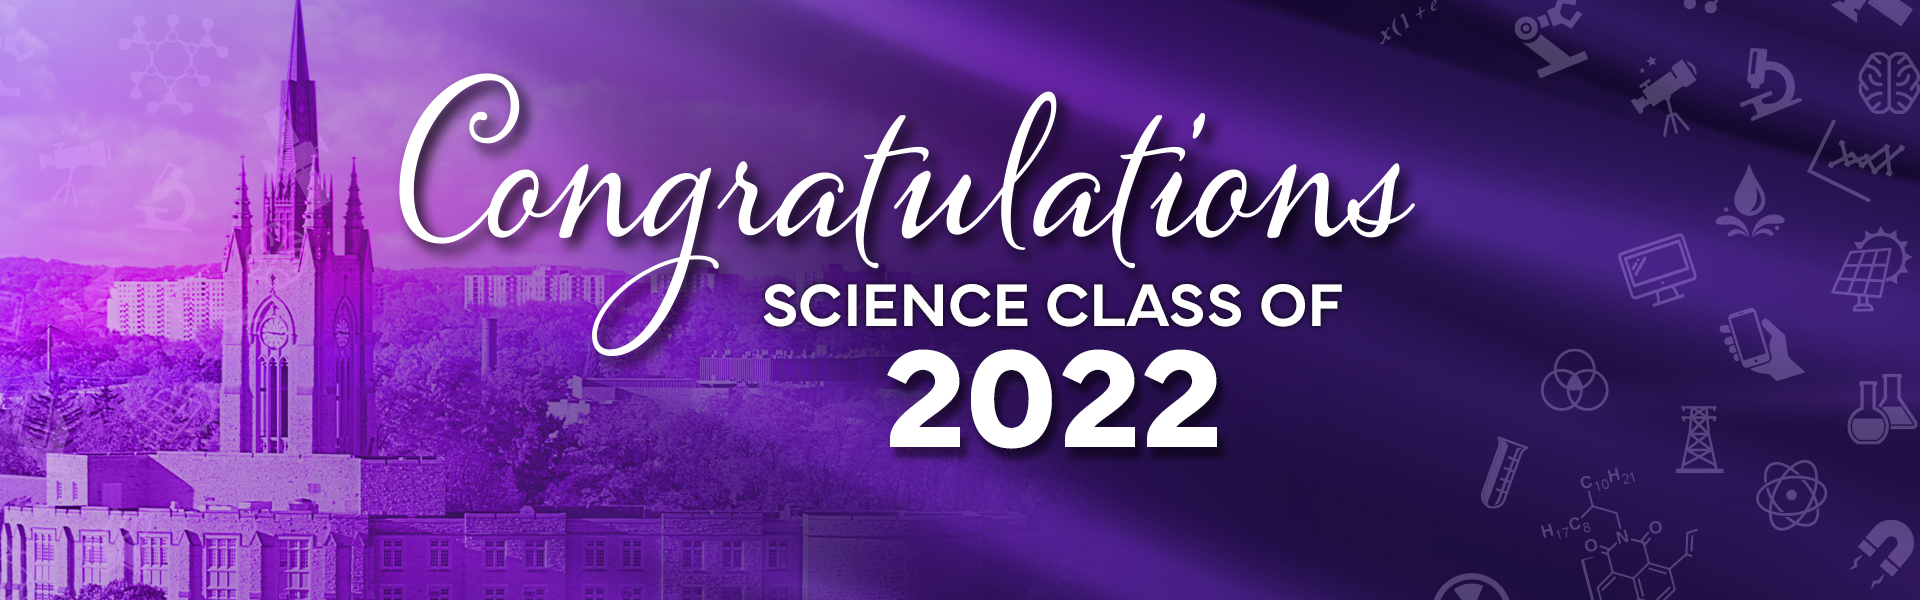 Congratulations Science Class of 2022 Banner